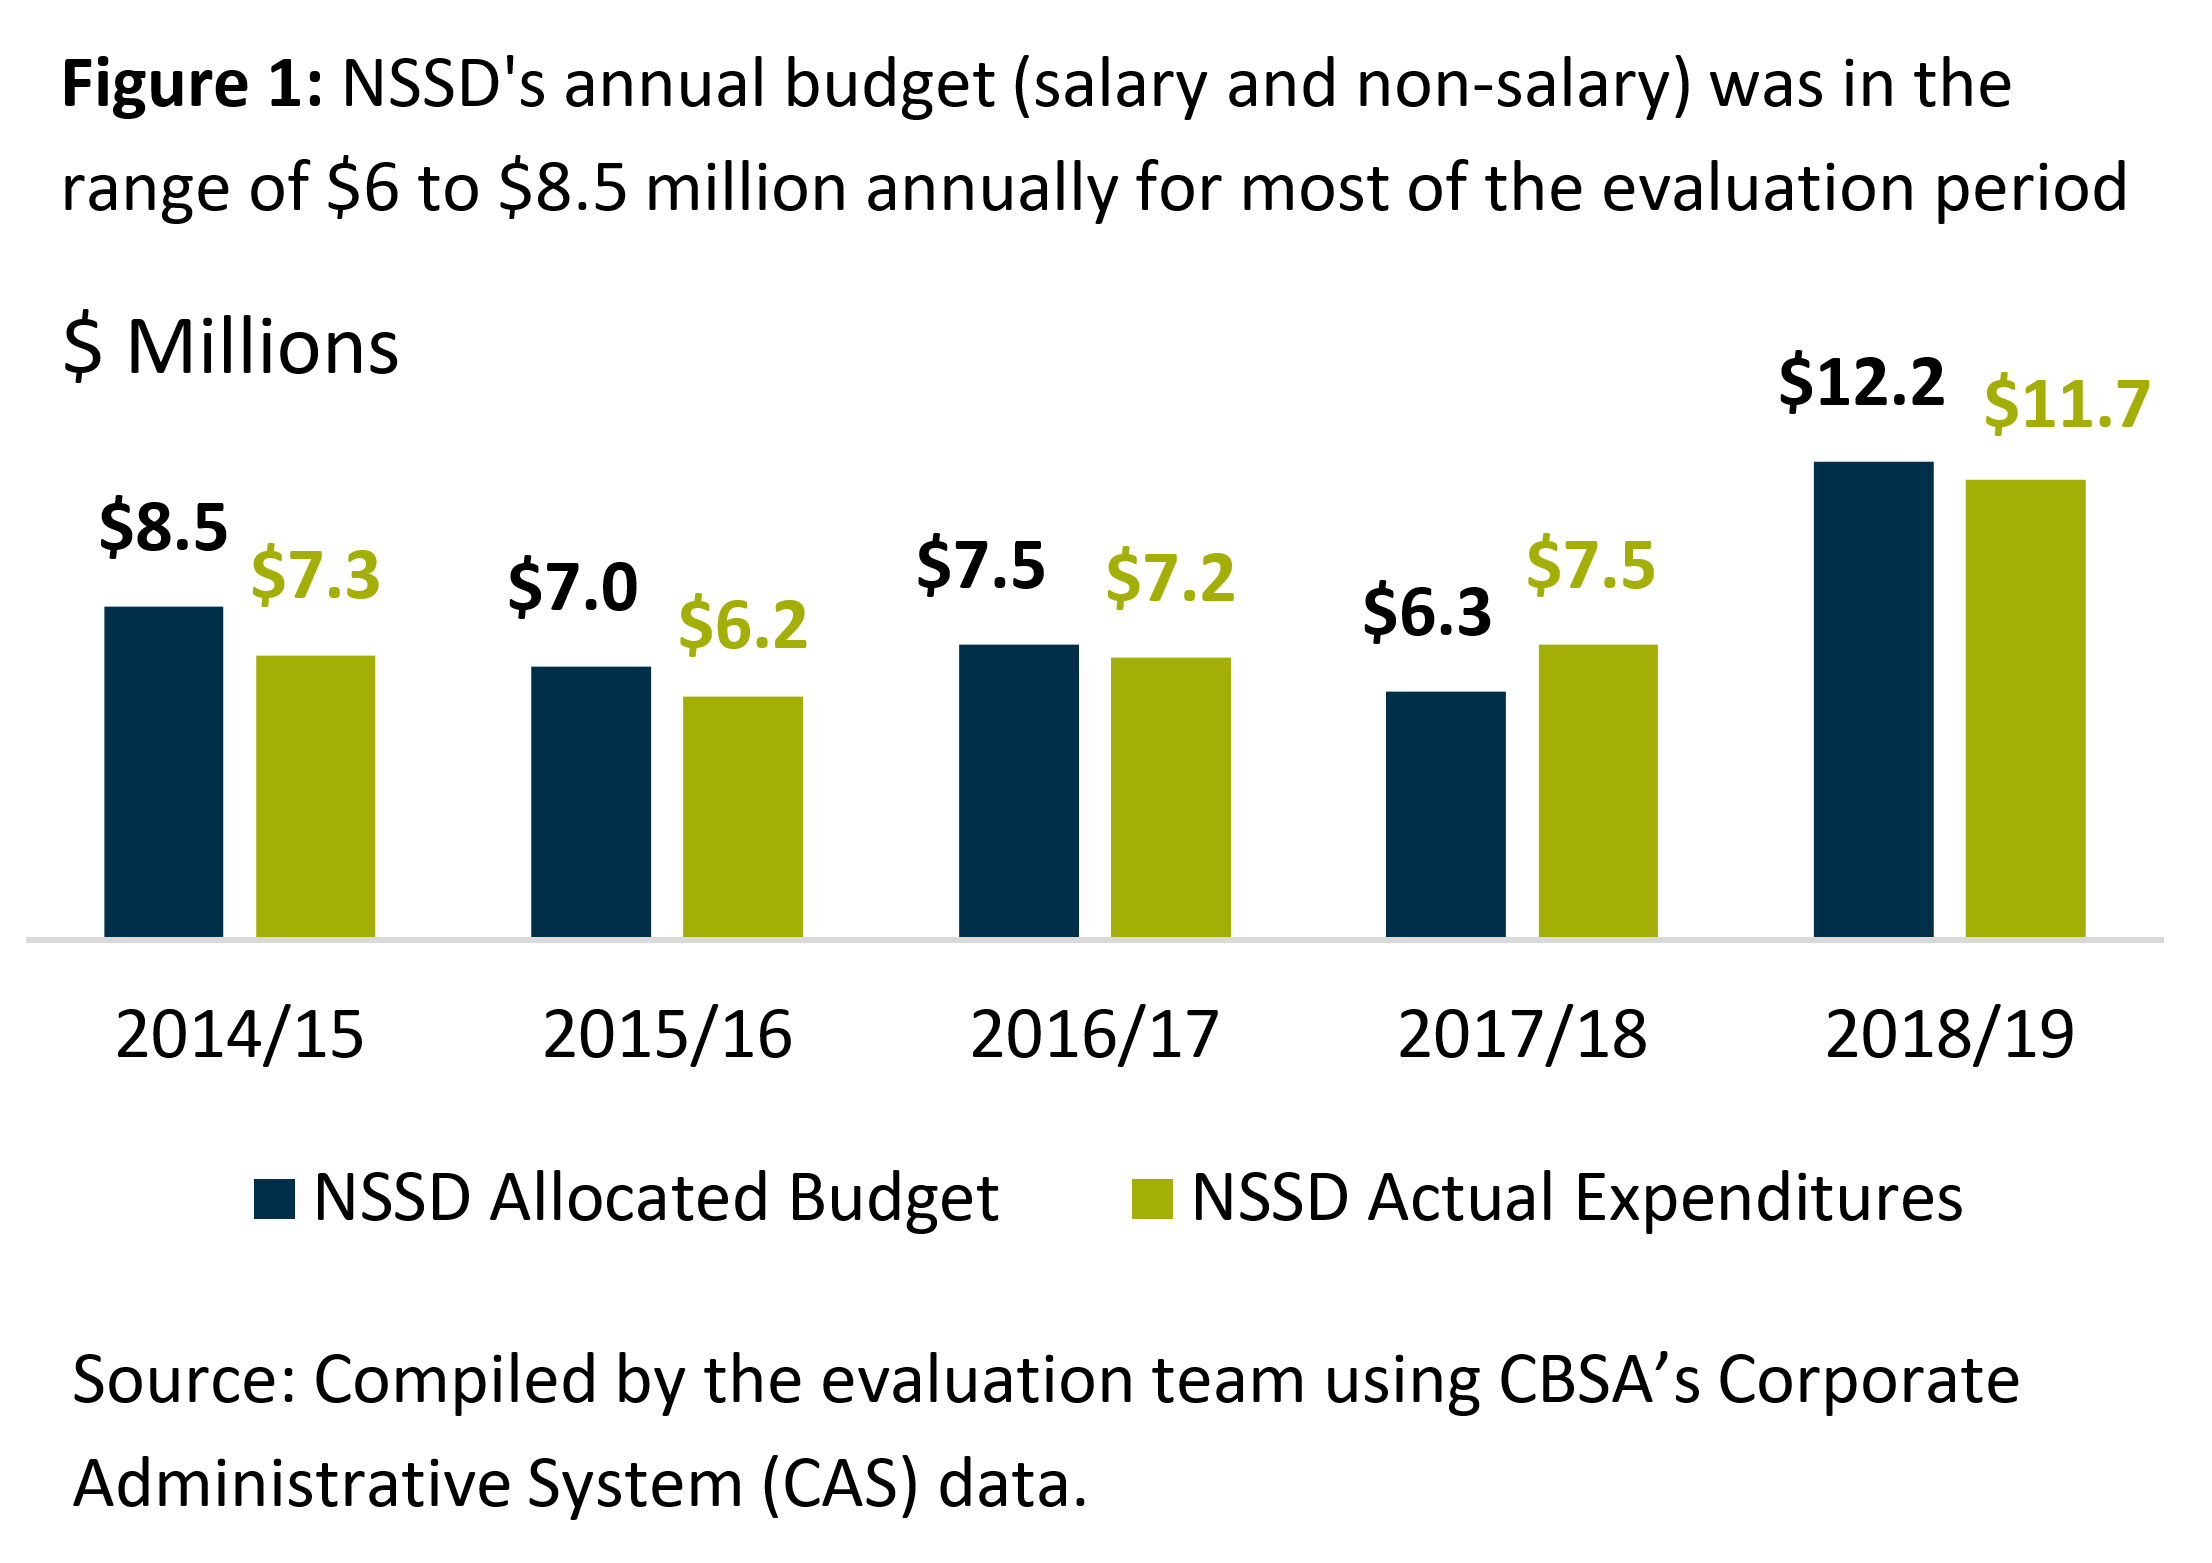 Figure 1 shows the <abbr>NSSD</abbr>’s annual budget (salary and non-salary) throughout the evaluation period, which was in the range of $6 million to $8.5 million annually, with the exception of 2018/19.